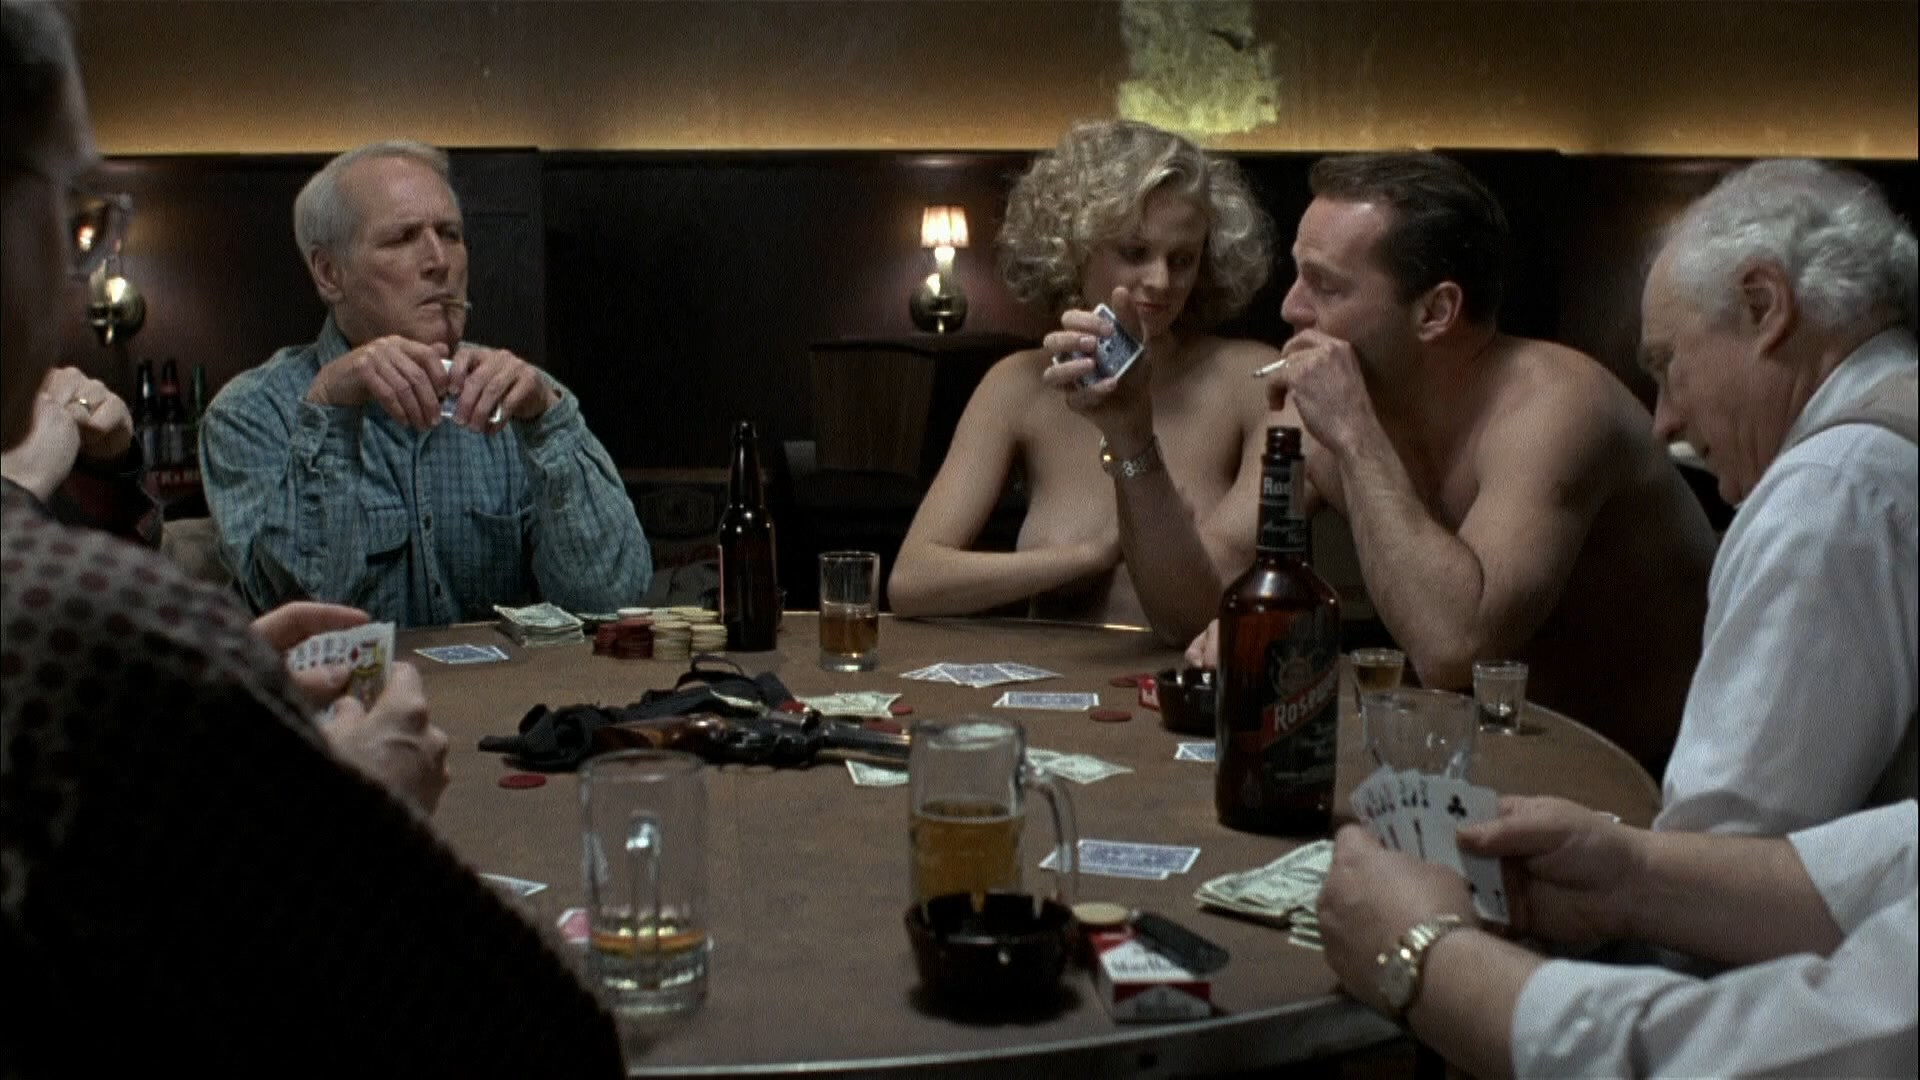 Long scene where Shannah Laumeister plays poker with some guys. 